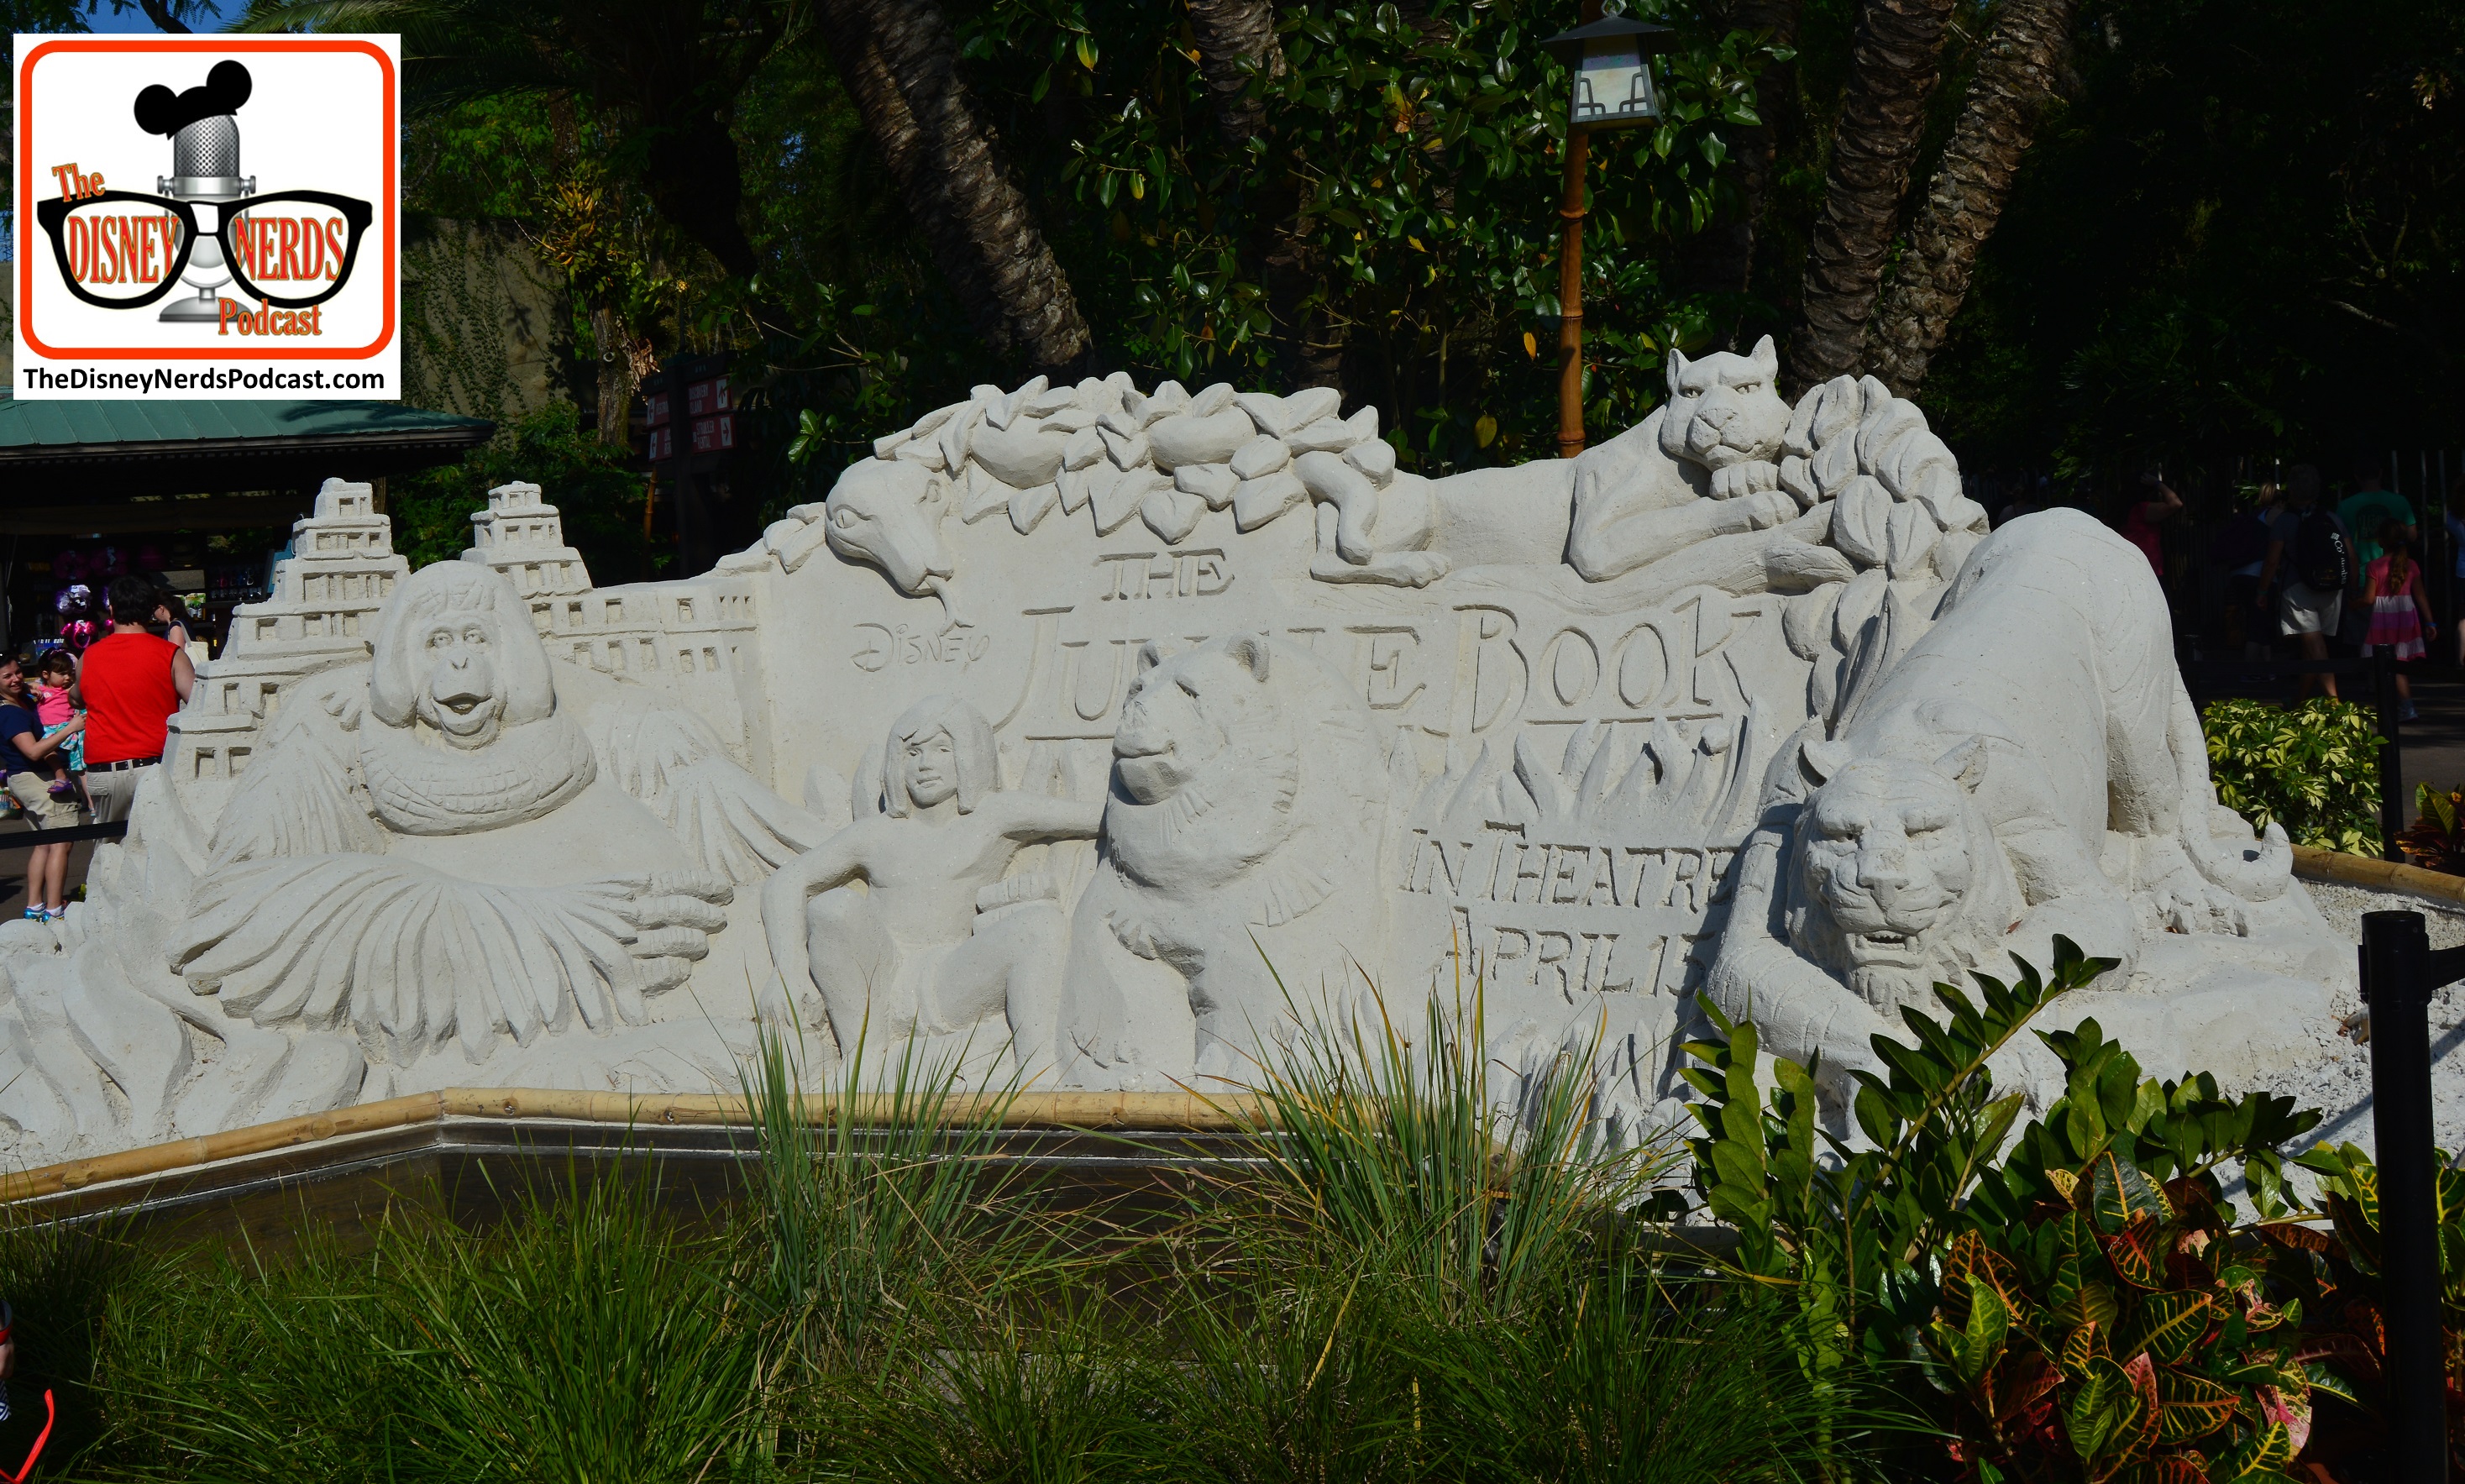 DNP April 2016 Photo Report: Animal Kingdom: Jungle Book sand sculpture - looks a lot like the once in Epcot for Flower and Garden.